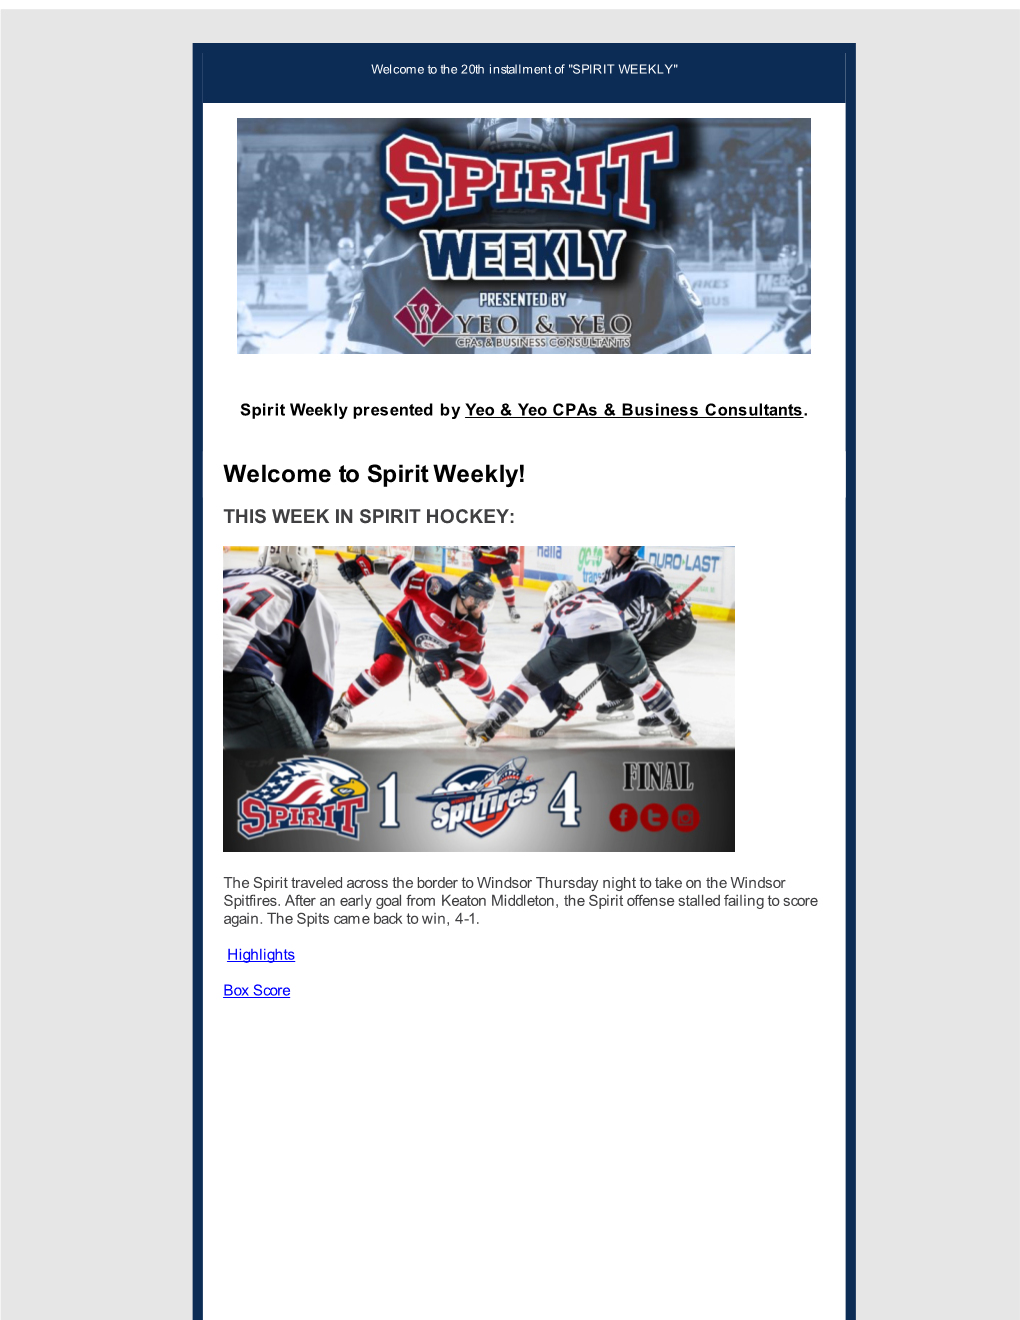 Welcome to Spirit Weekly!